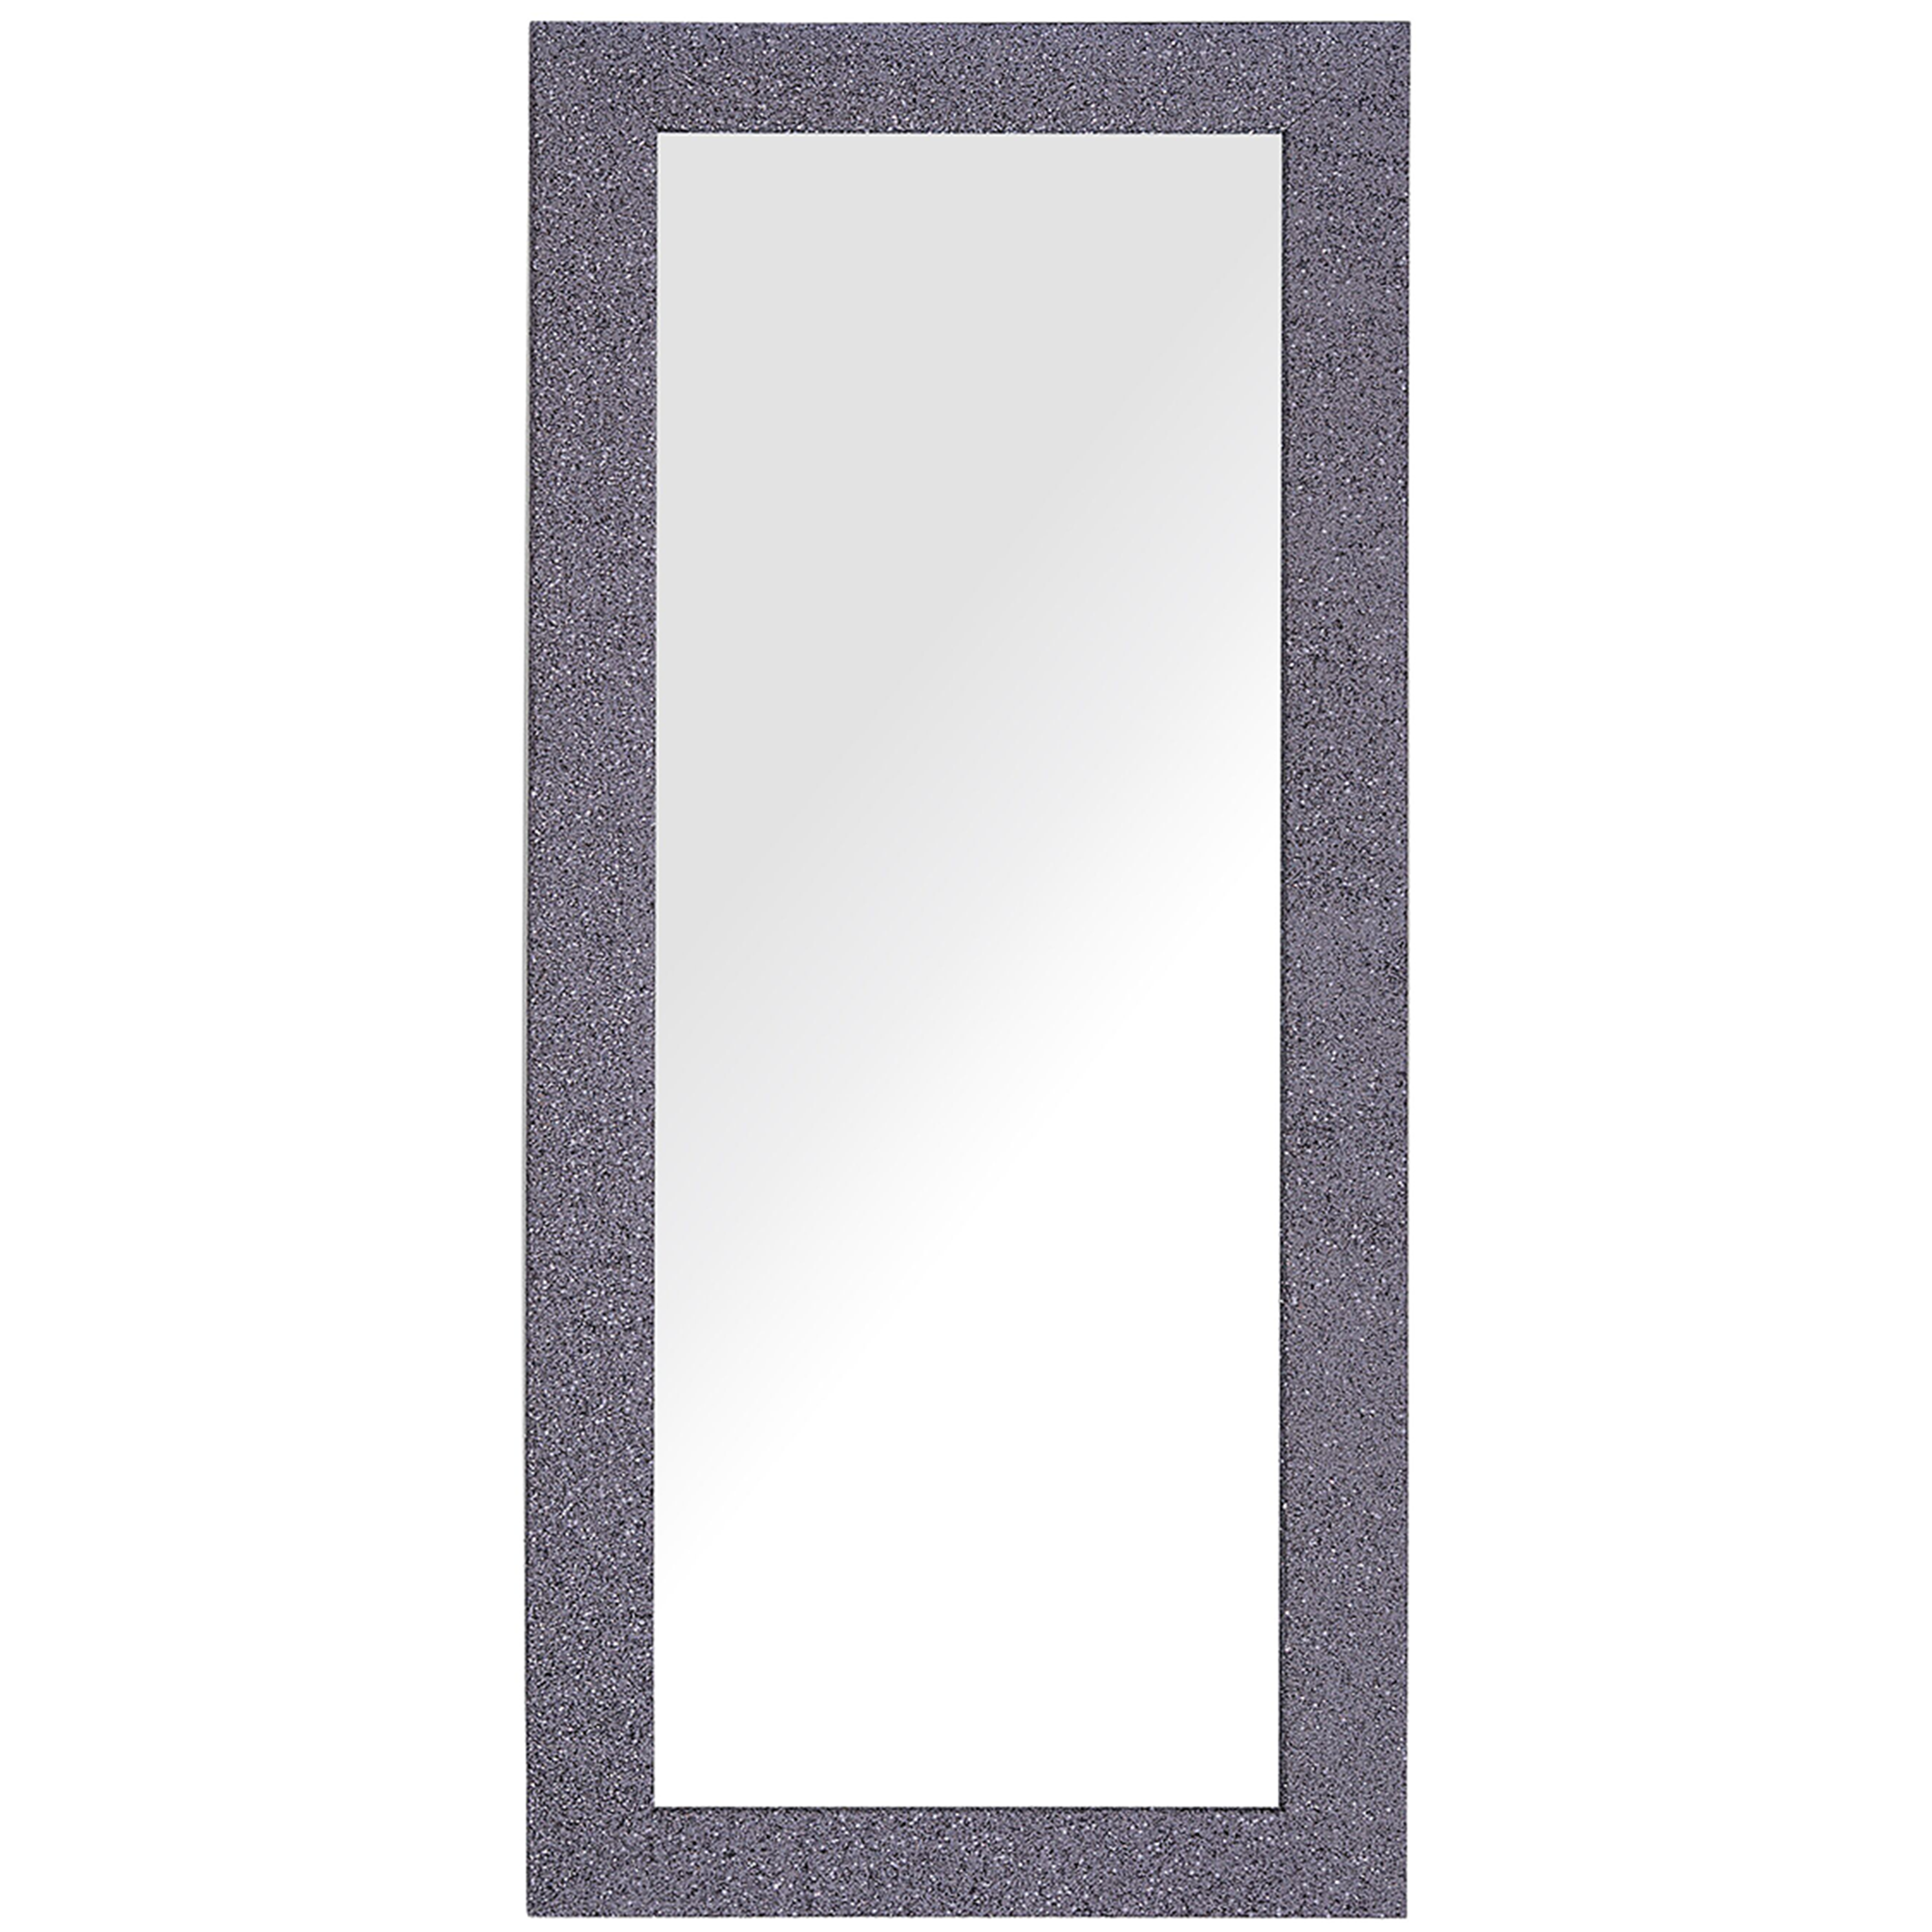 Beliani Wall Mounted Hanging Mirror Grey with Lilac 51 x 130 cm Stone Effect Industrial Rectangular